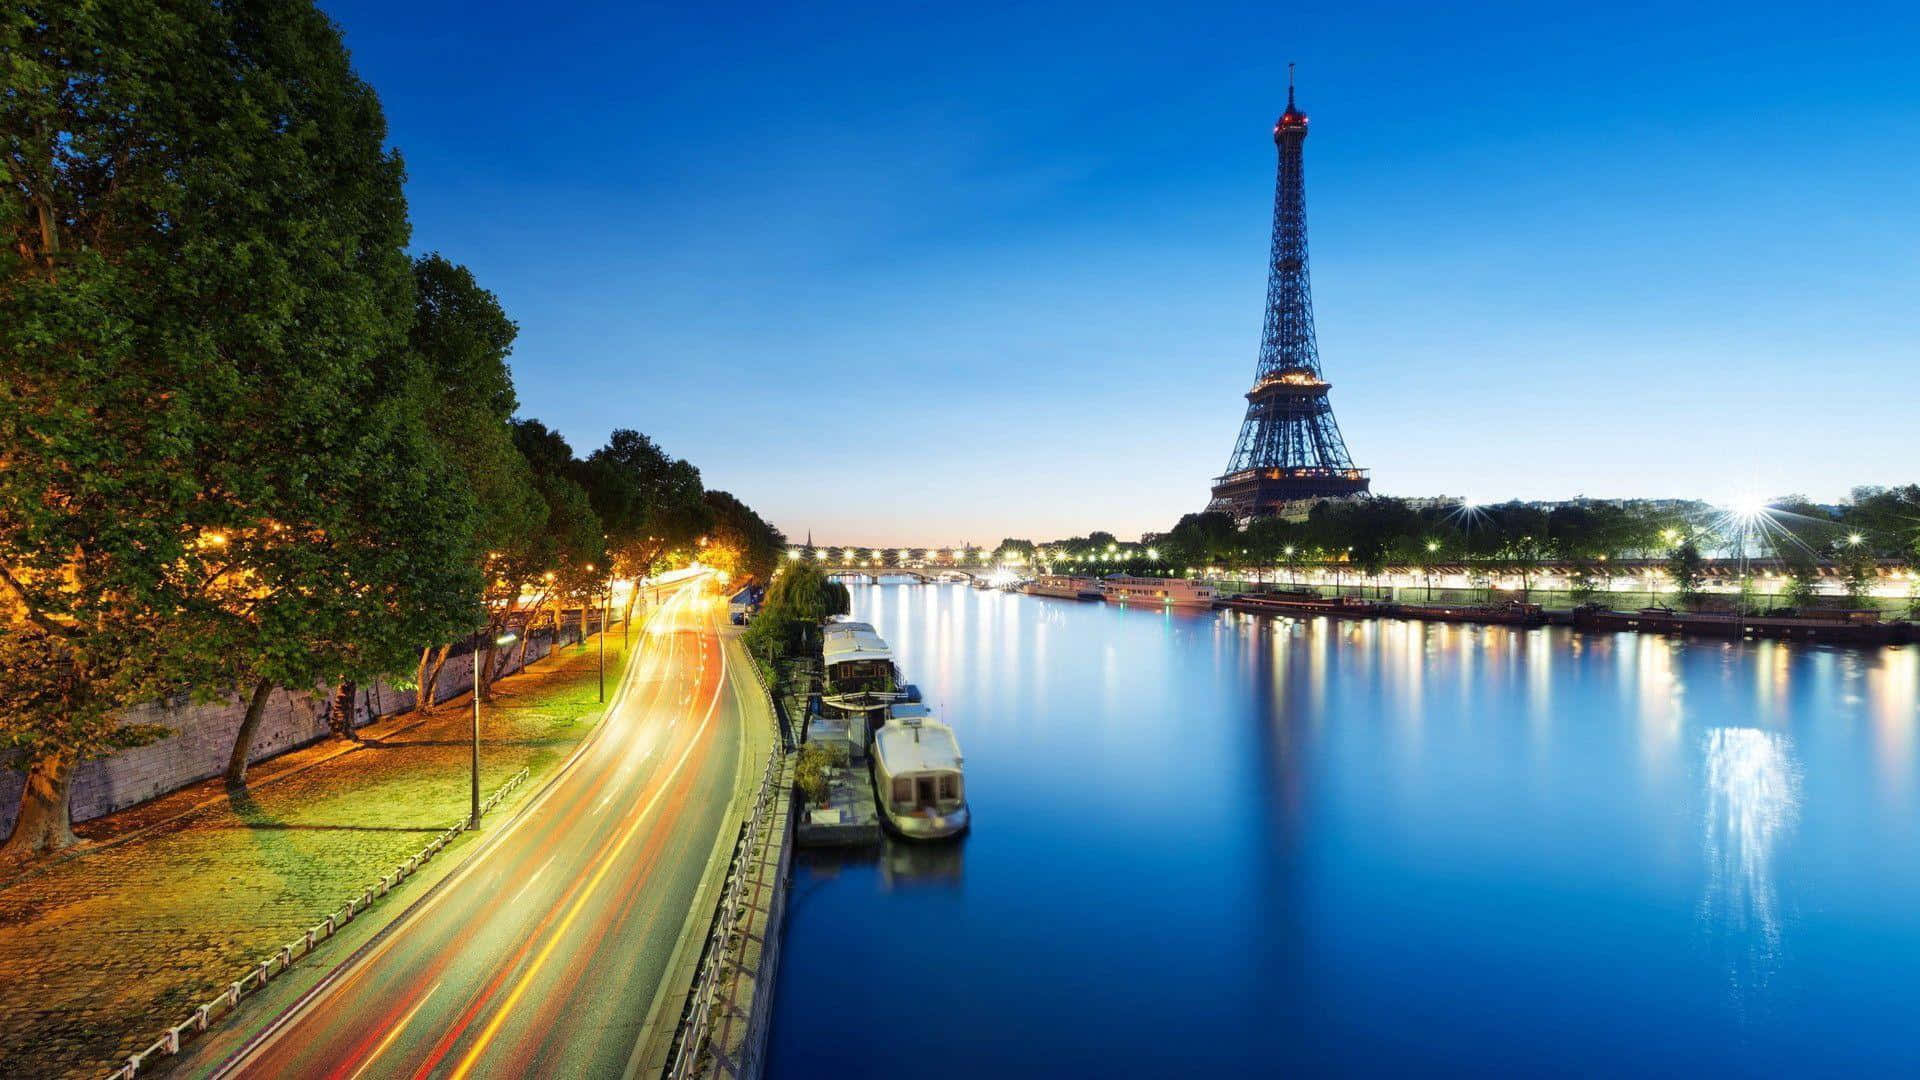 The iconic Eiffel Tower standing high in the city of Paris